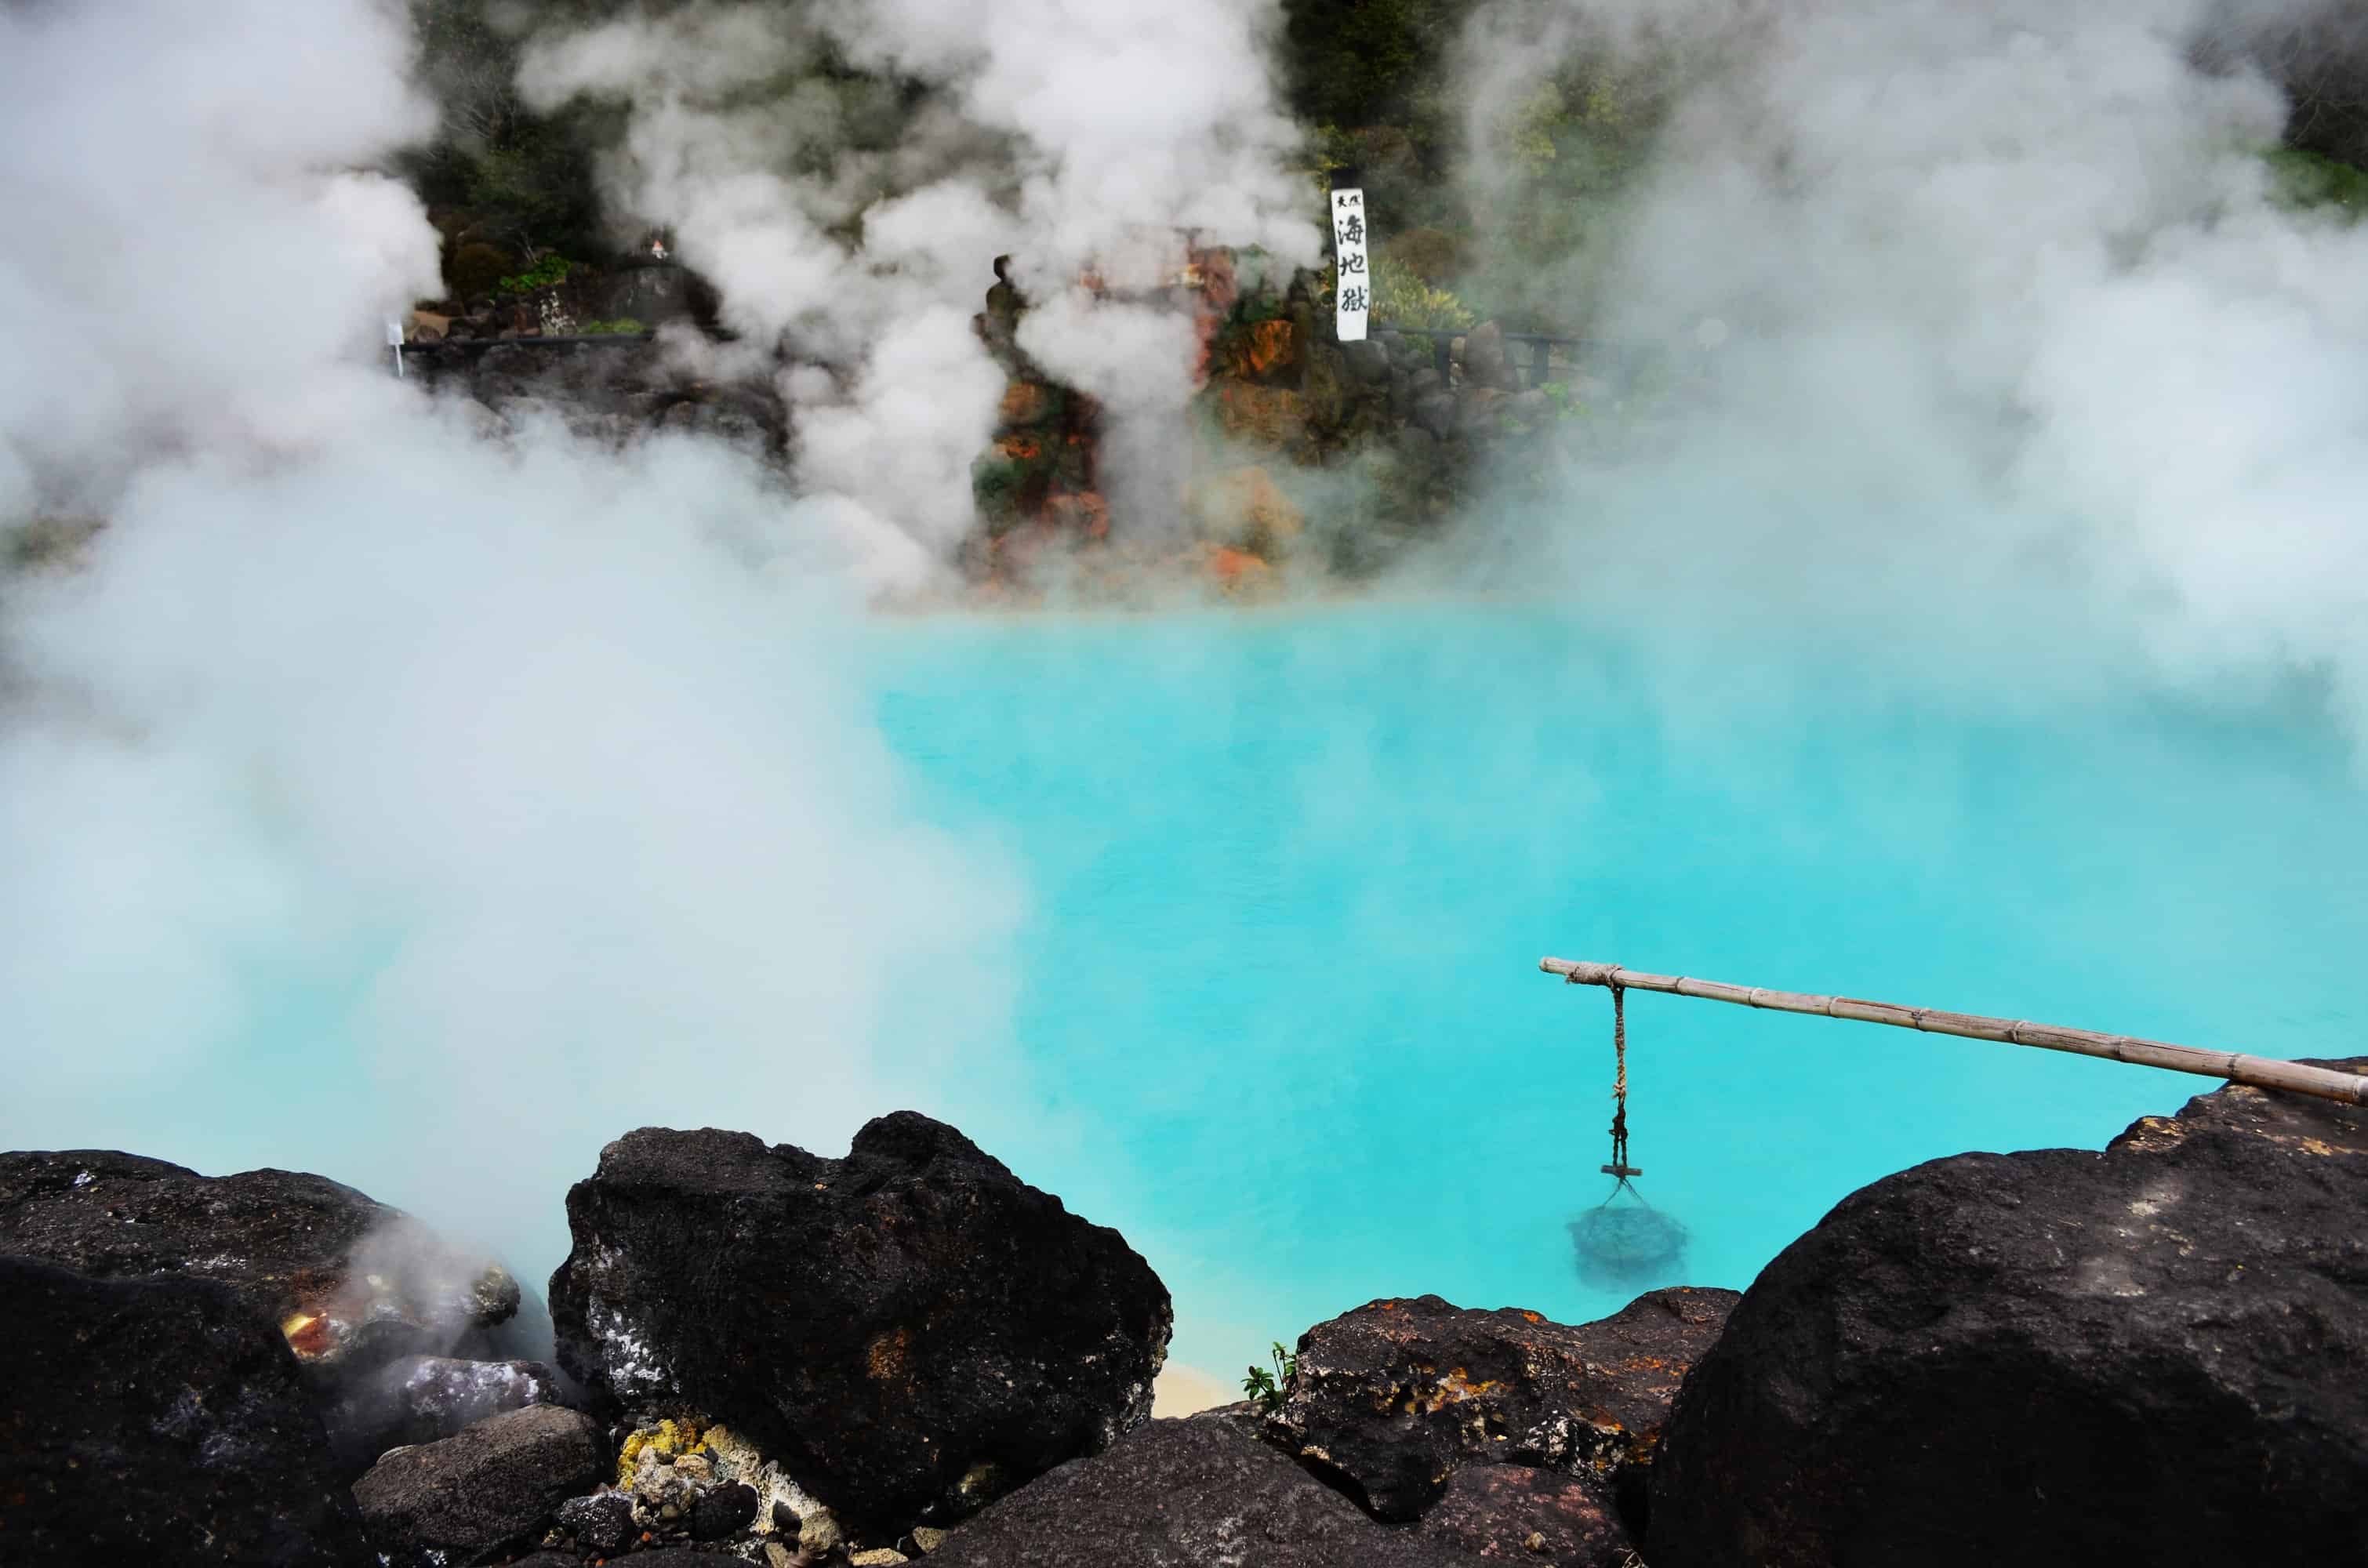 Explore Legends and Lounging in Oita, Japan’s Famous Hot Springs